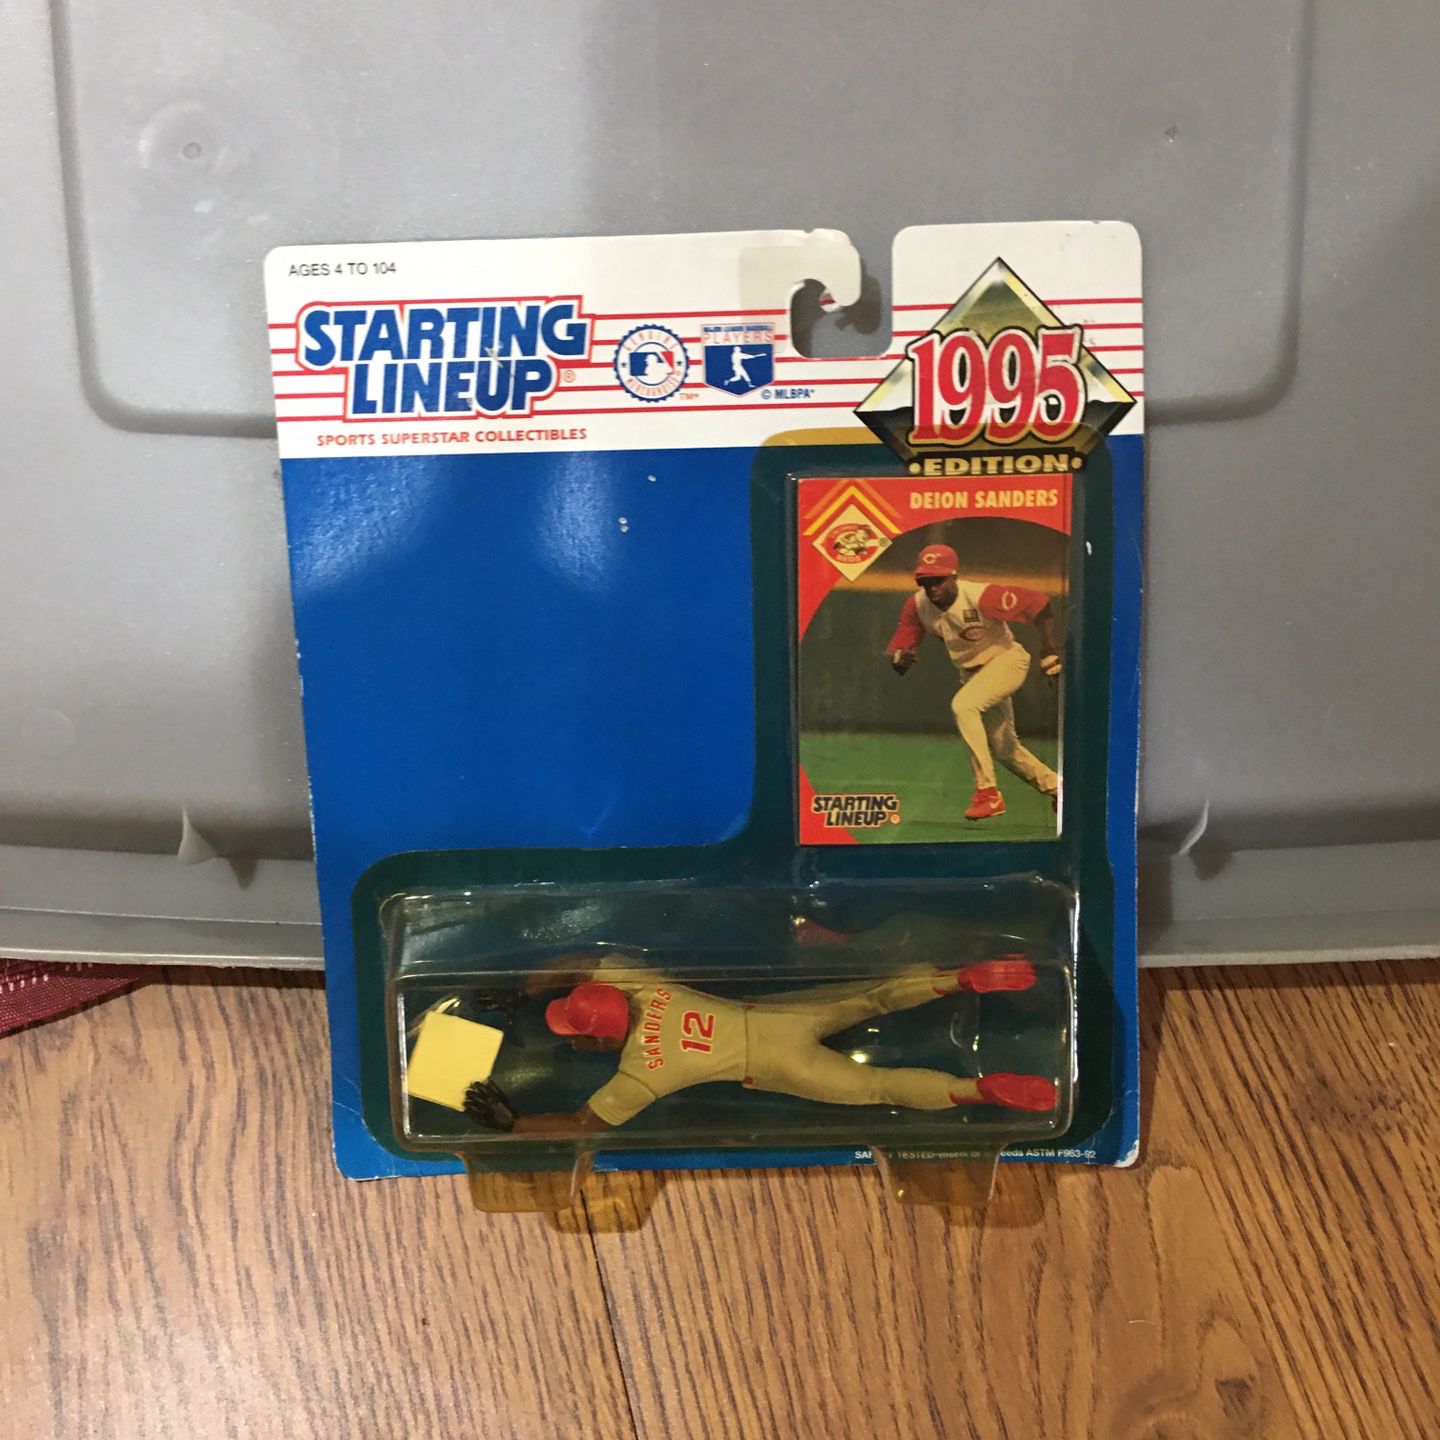 Starting Lineup 1995 Edition Deion Sanders Cincinnati Reds Action Figure See My Site For More Awesome Sports Items  